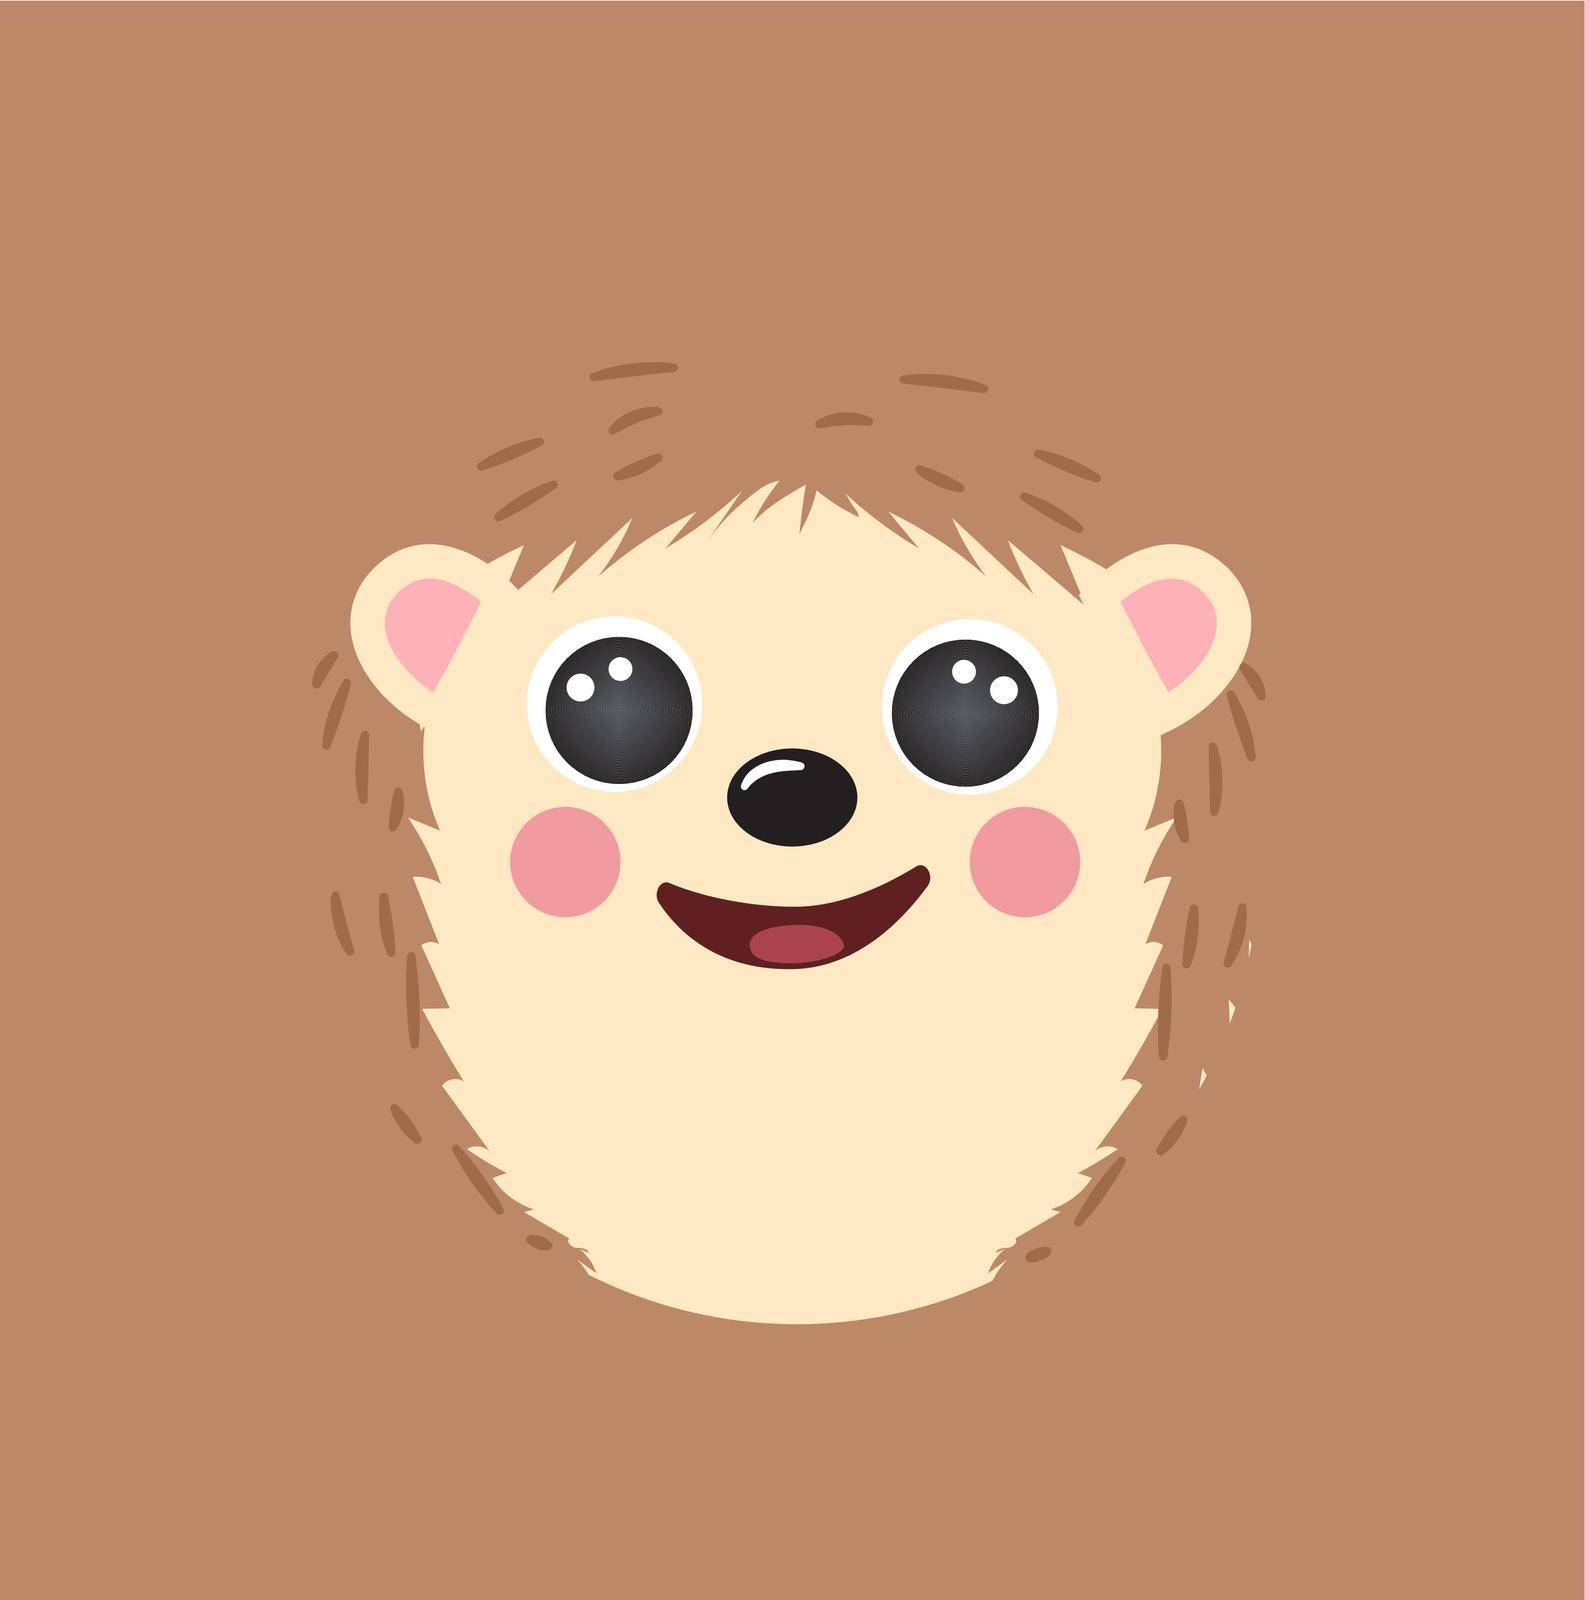 Cute Hedgehog portrait square smiley head cartoon round shape animal face, isolated avatar character vector icon flat by Vectoressa